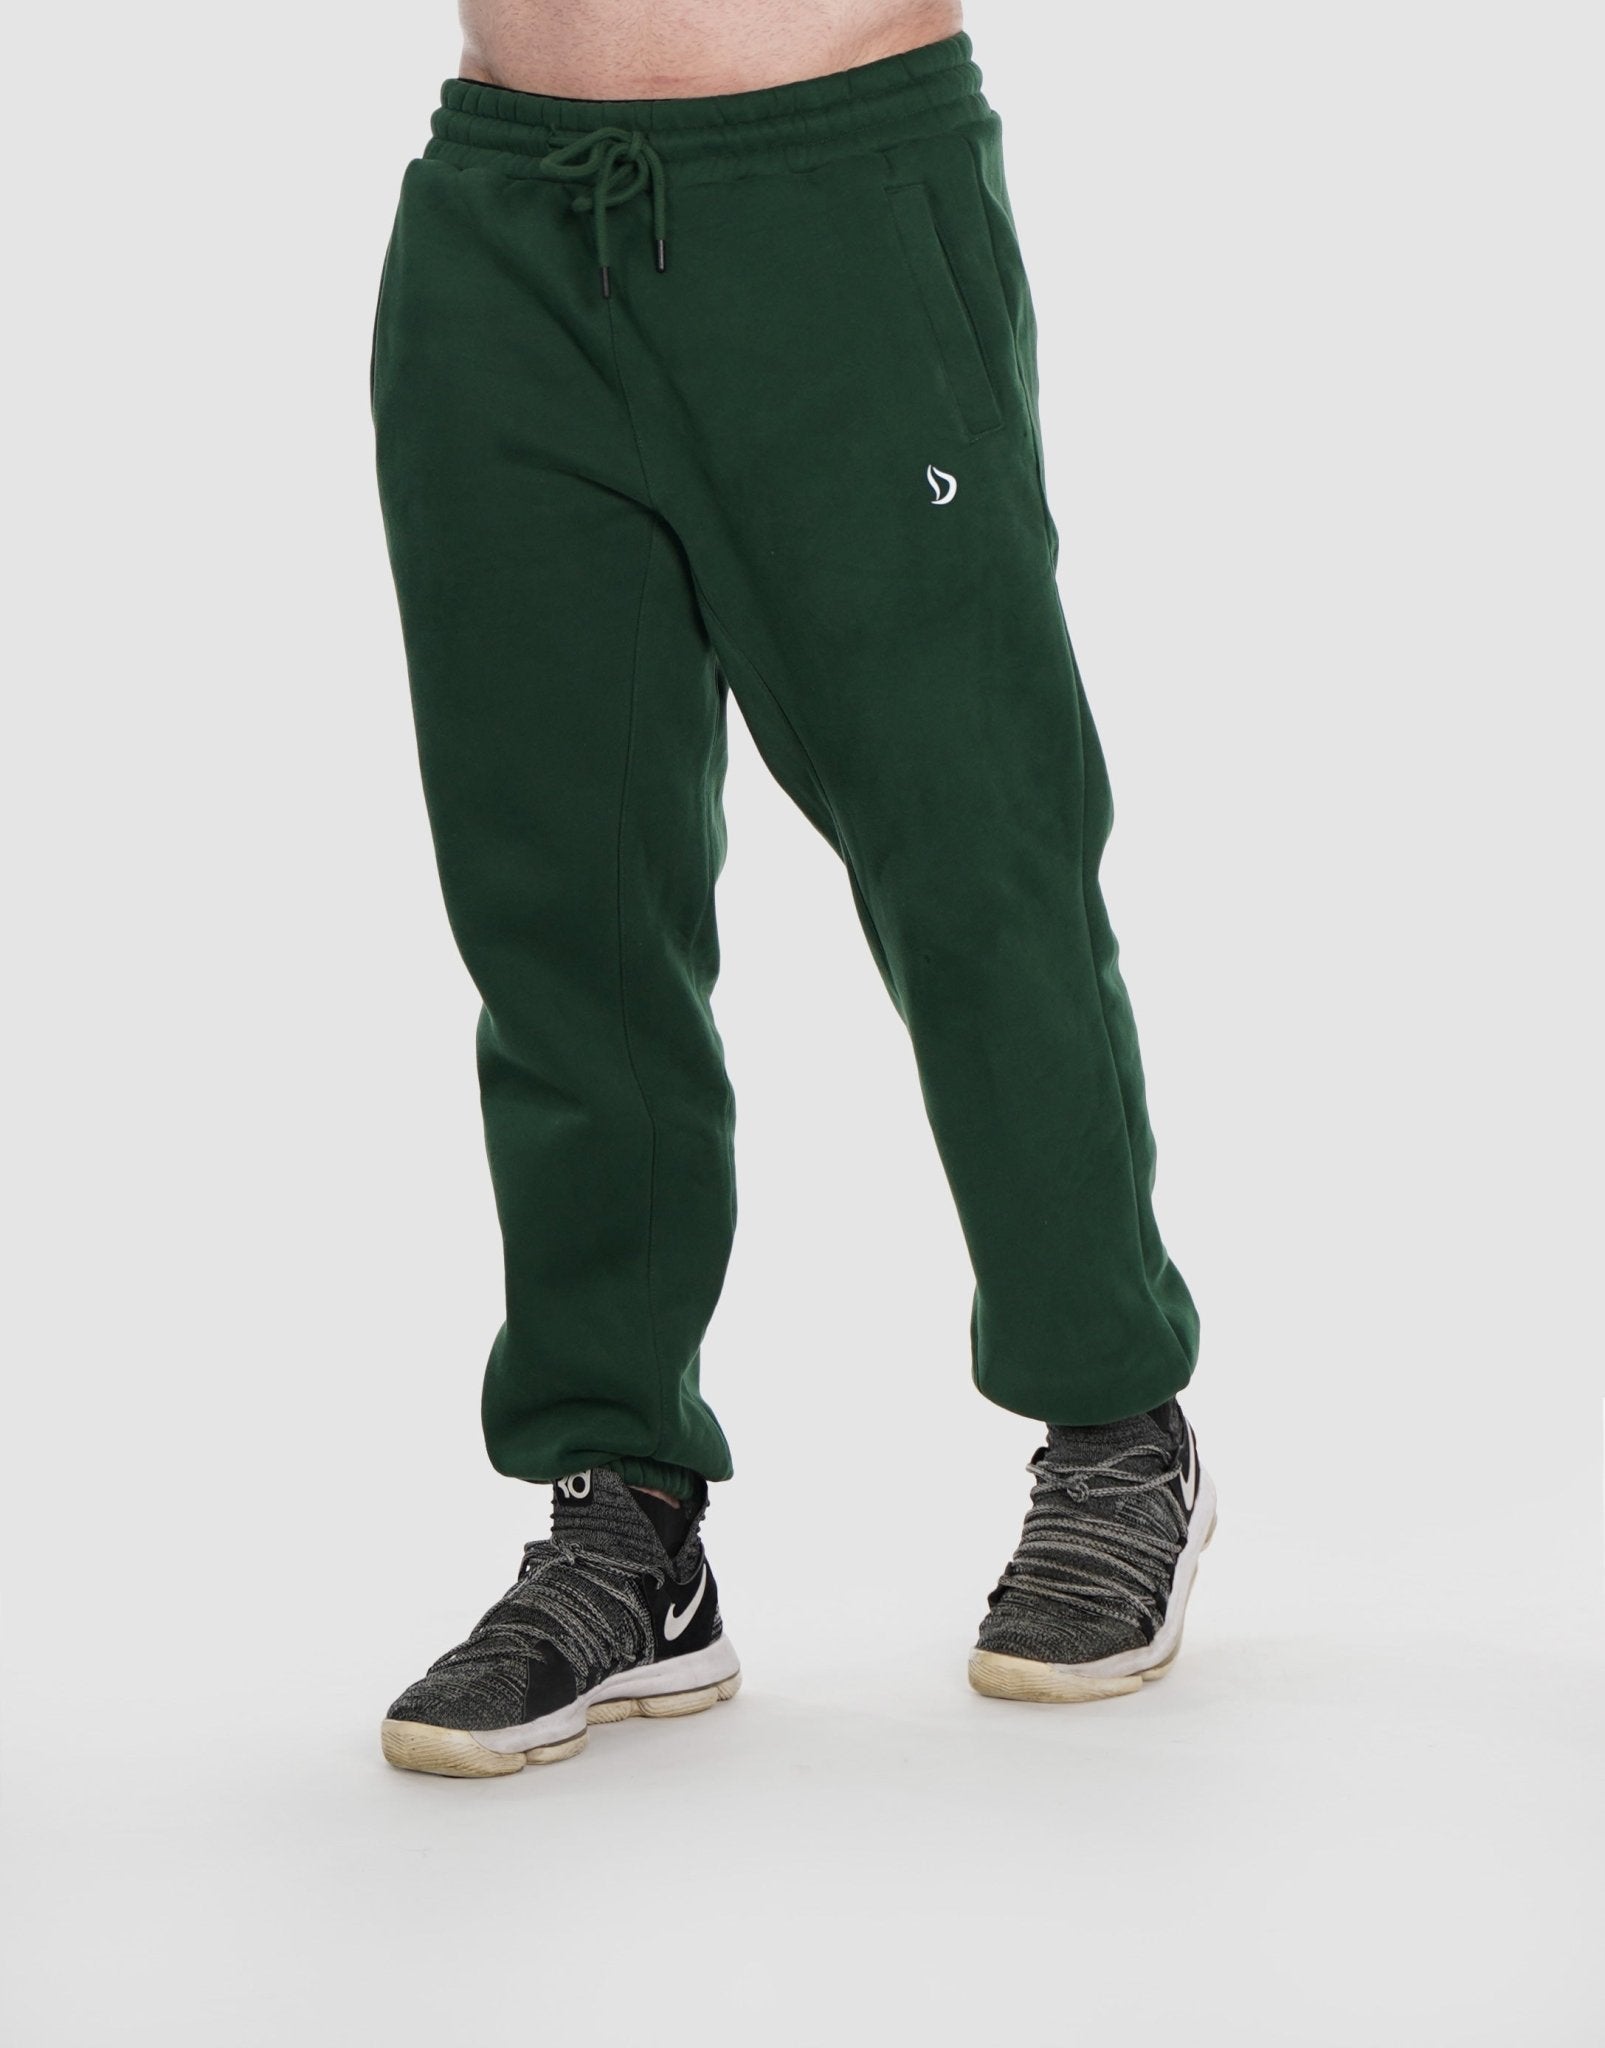 Champion Sweatpants Men's Jersey Joggers Side Pockets Comfortable Athletic  Fit